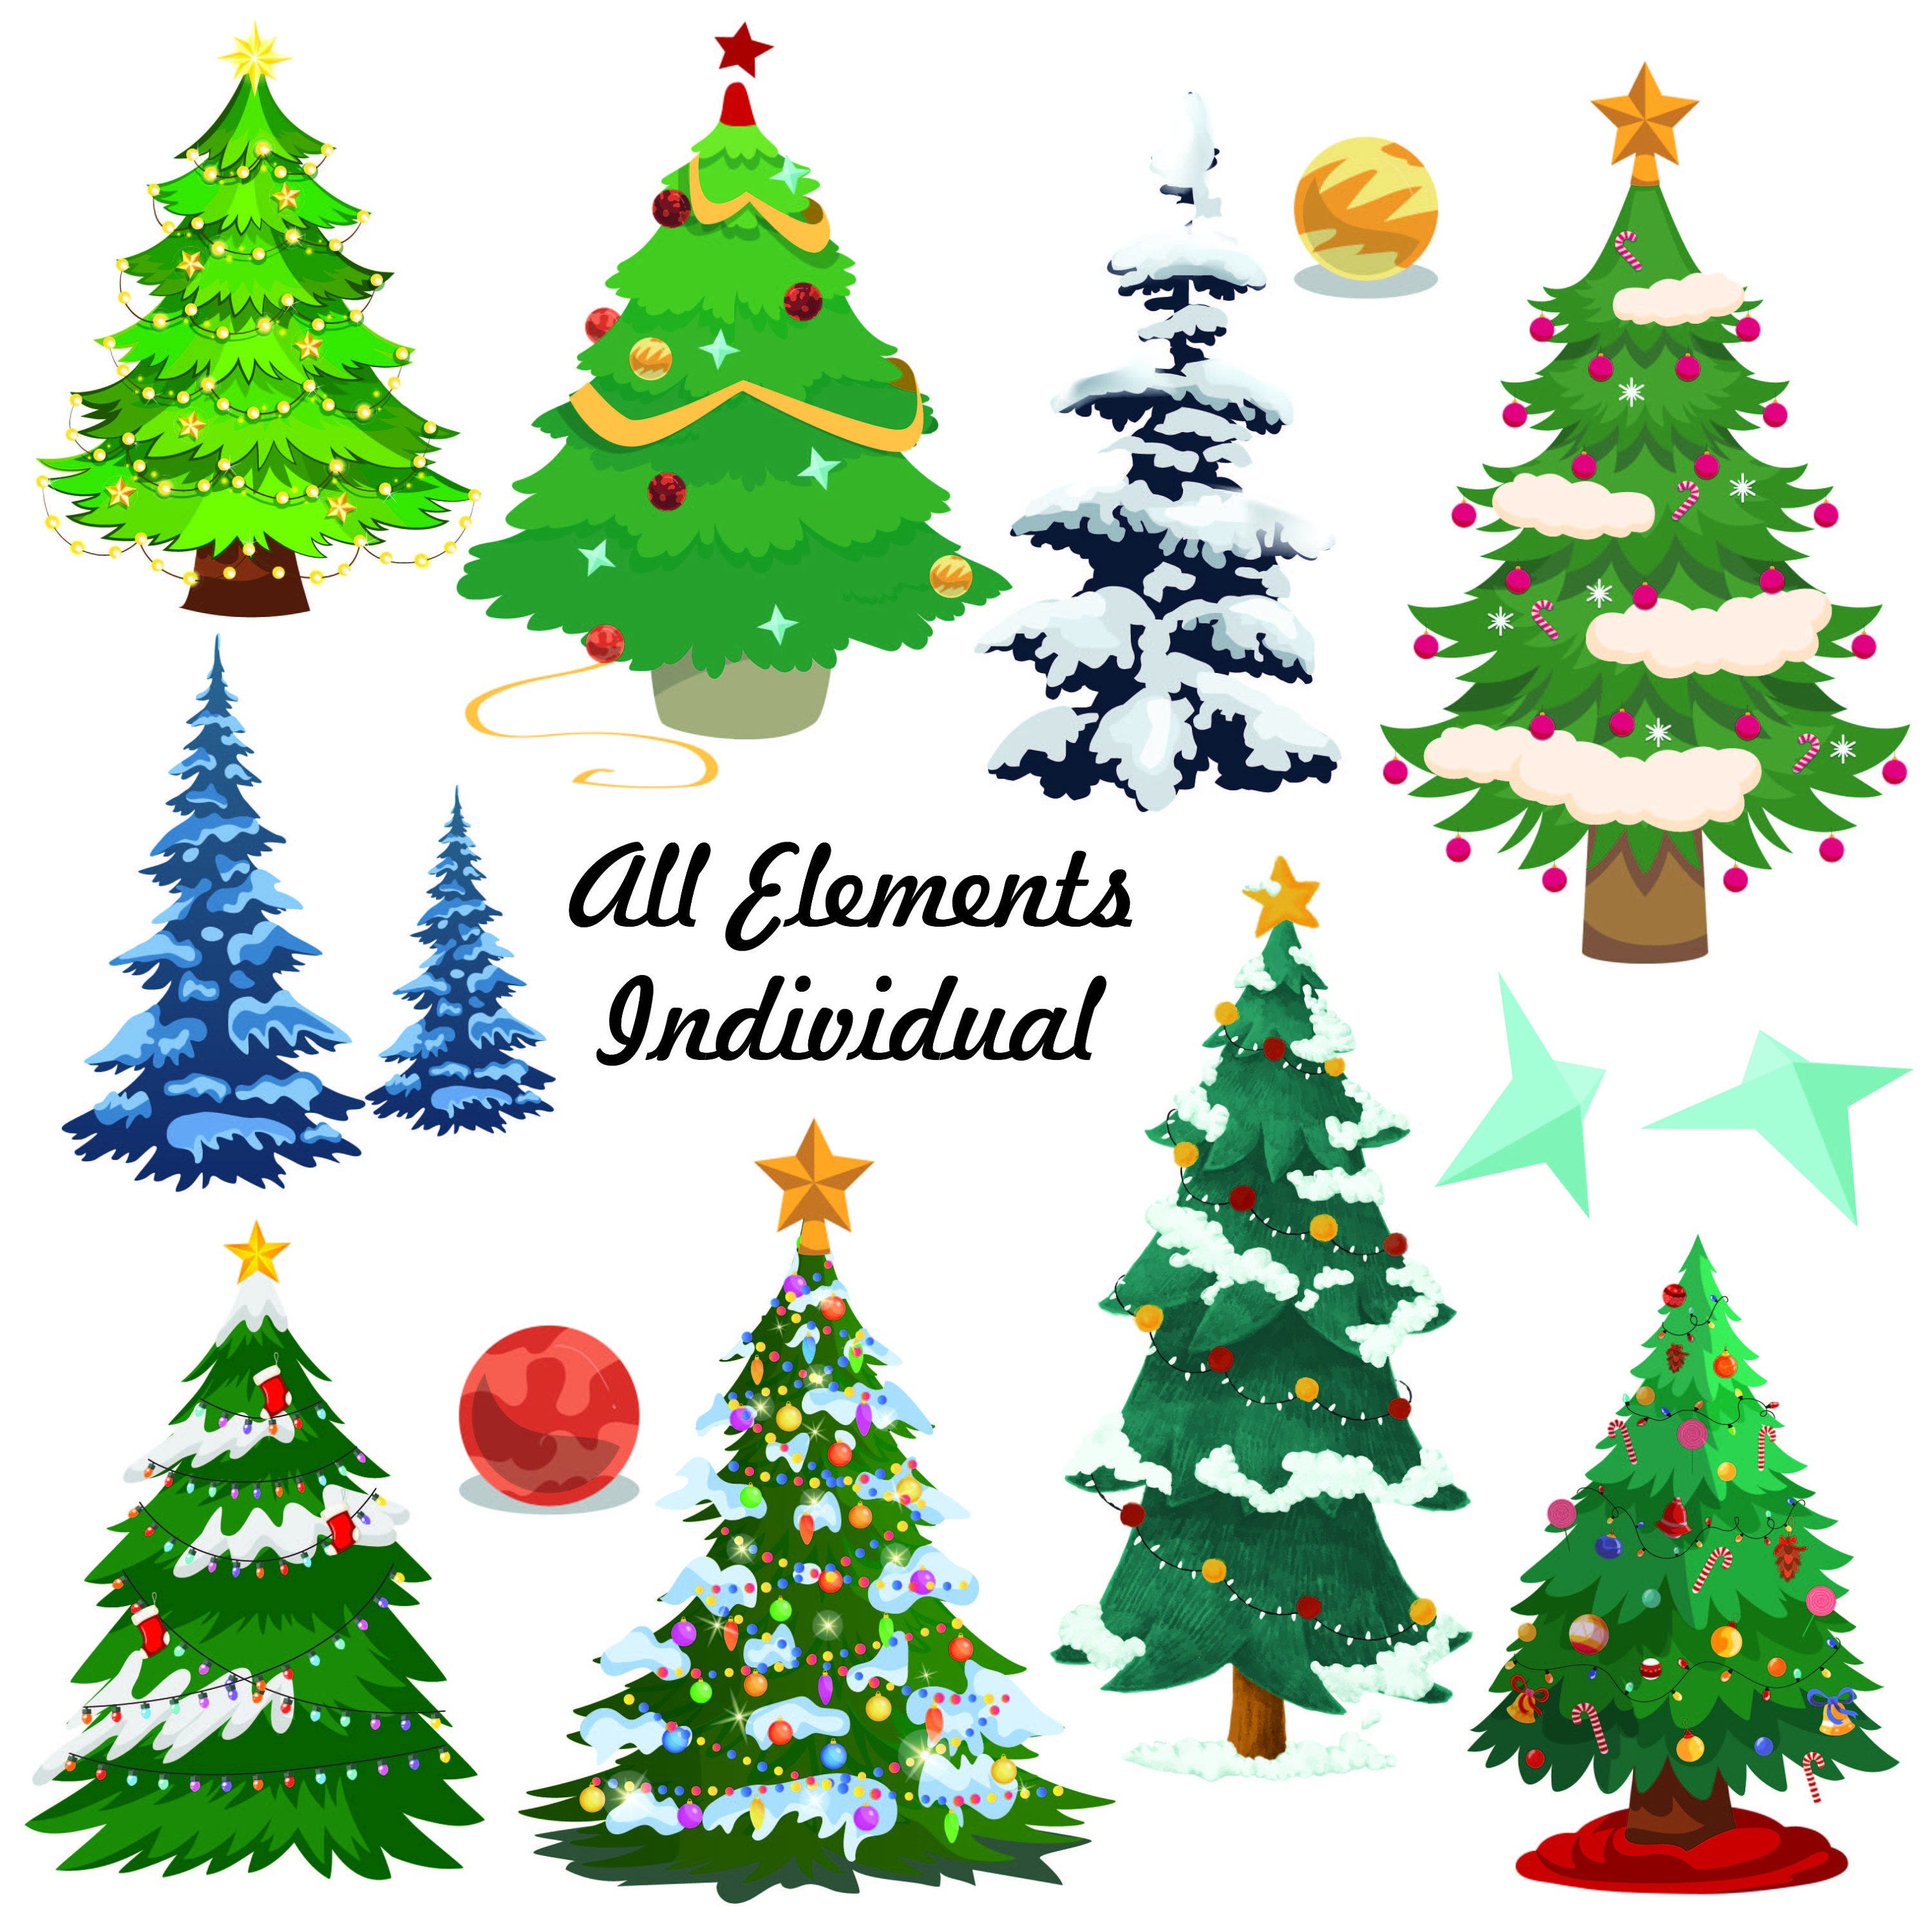 Watercolor Christmas Tree SVG, Winter Snow Trees clipart, Digital Christmas Tree PNG, Holiday Design, planner, scrapbooking PNG